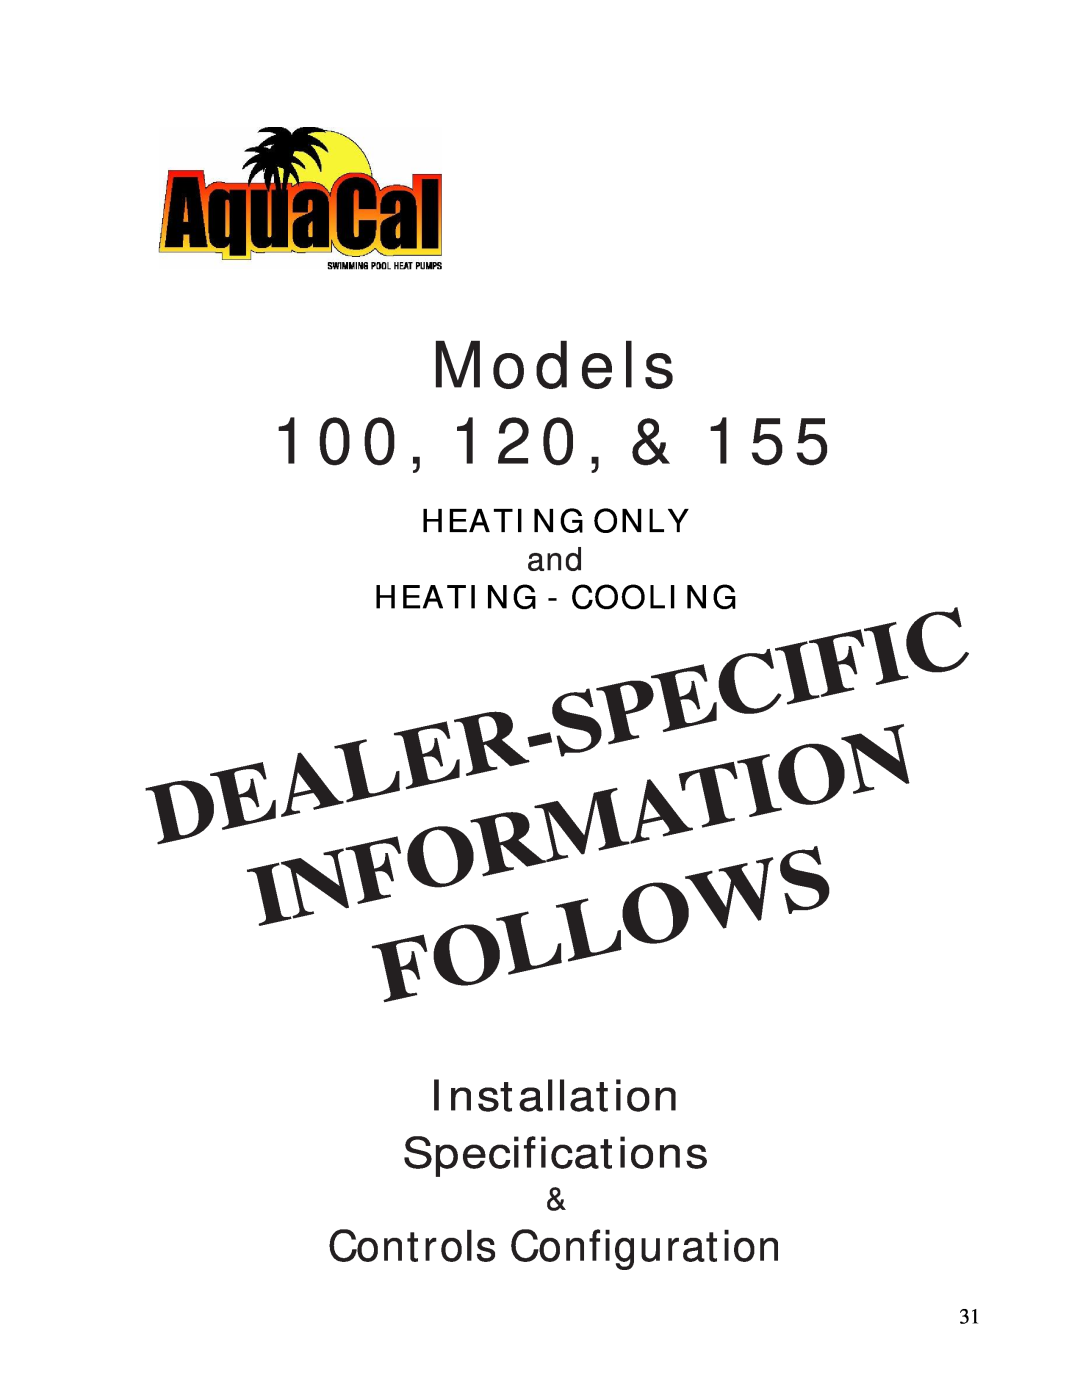 Aquacal owner manual Specificdealerinformation Follows, Models 100, Installation Specifications, Controls Configuration 